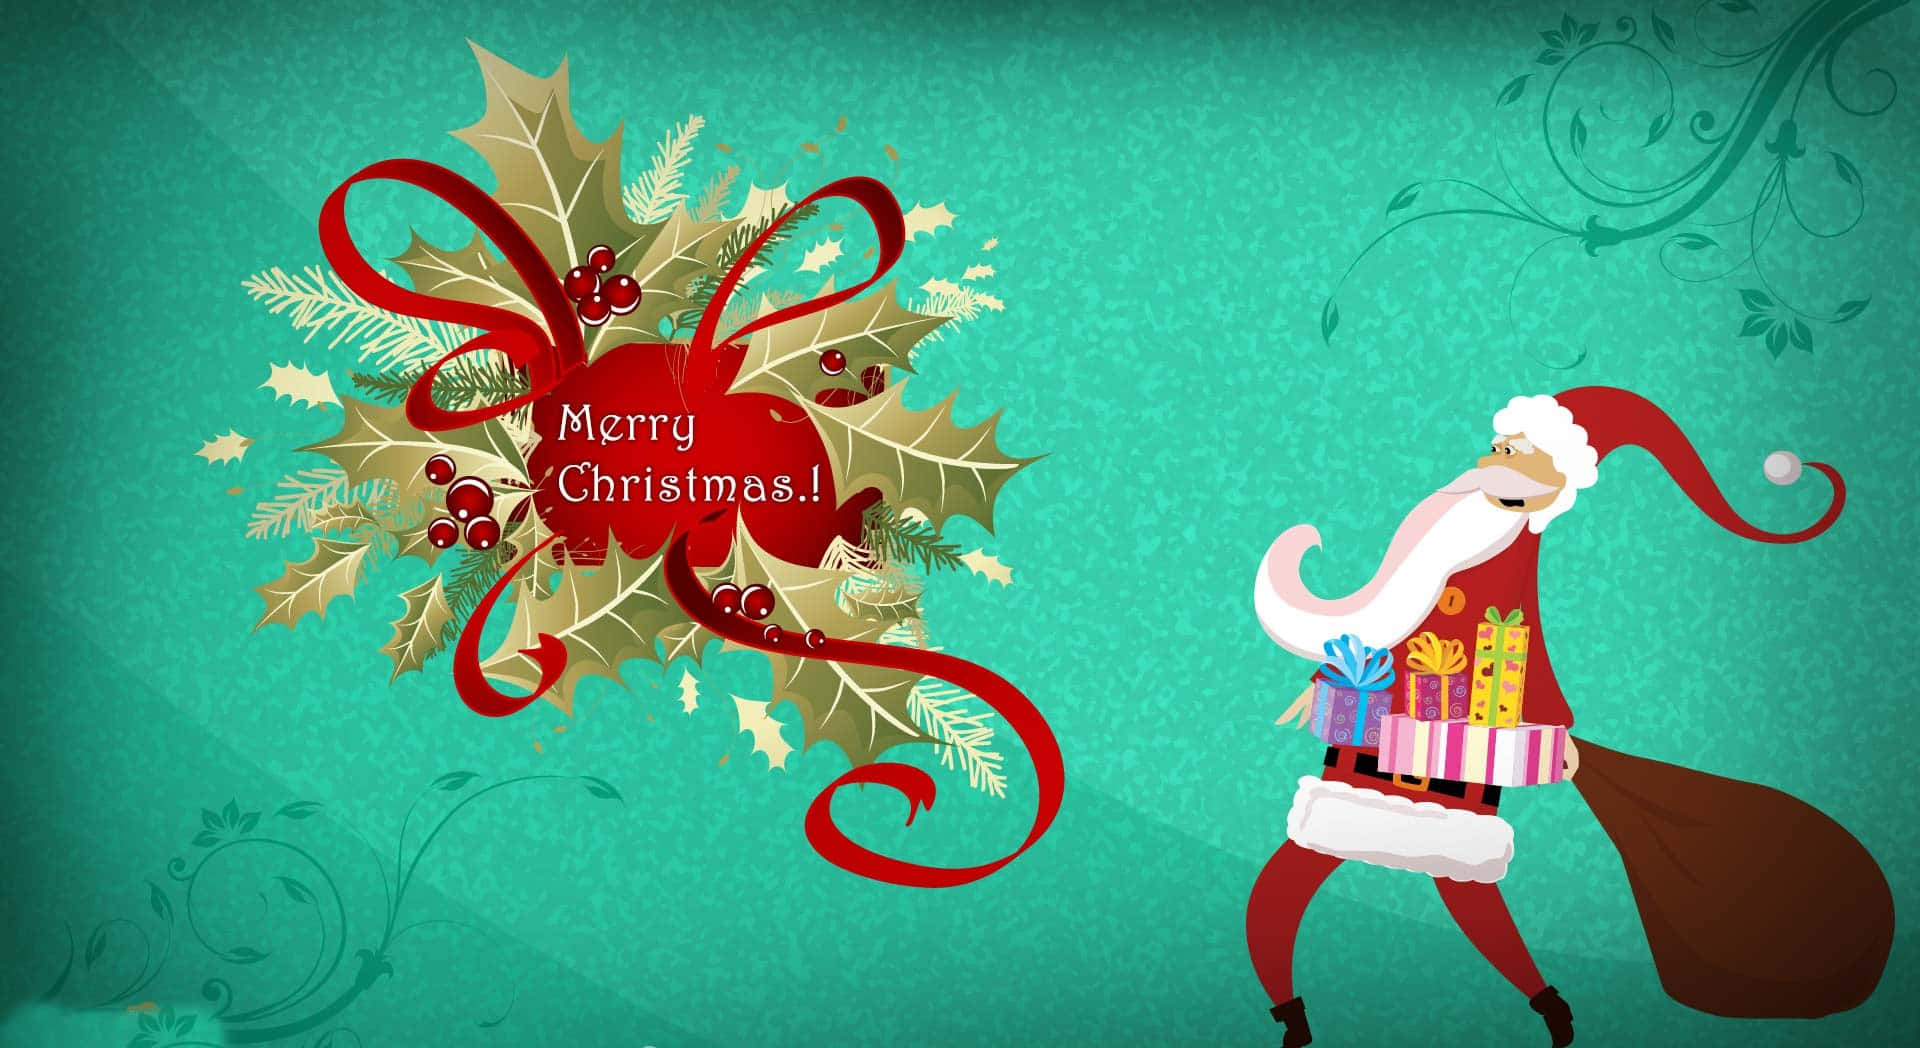 Funny Christmas Zoom Background Santa Claus Holiday Greetings